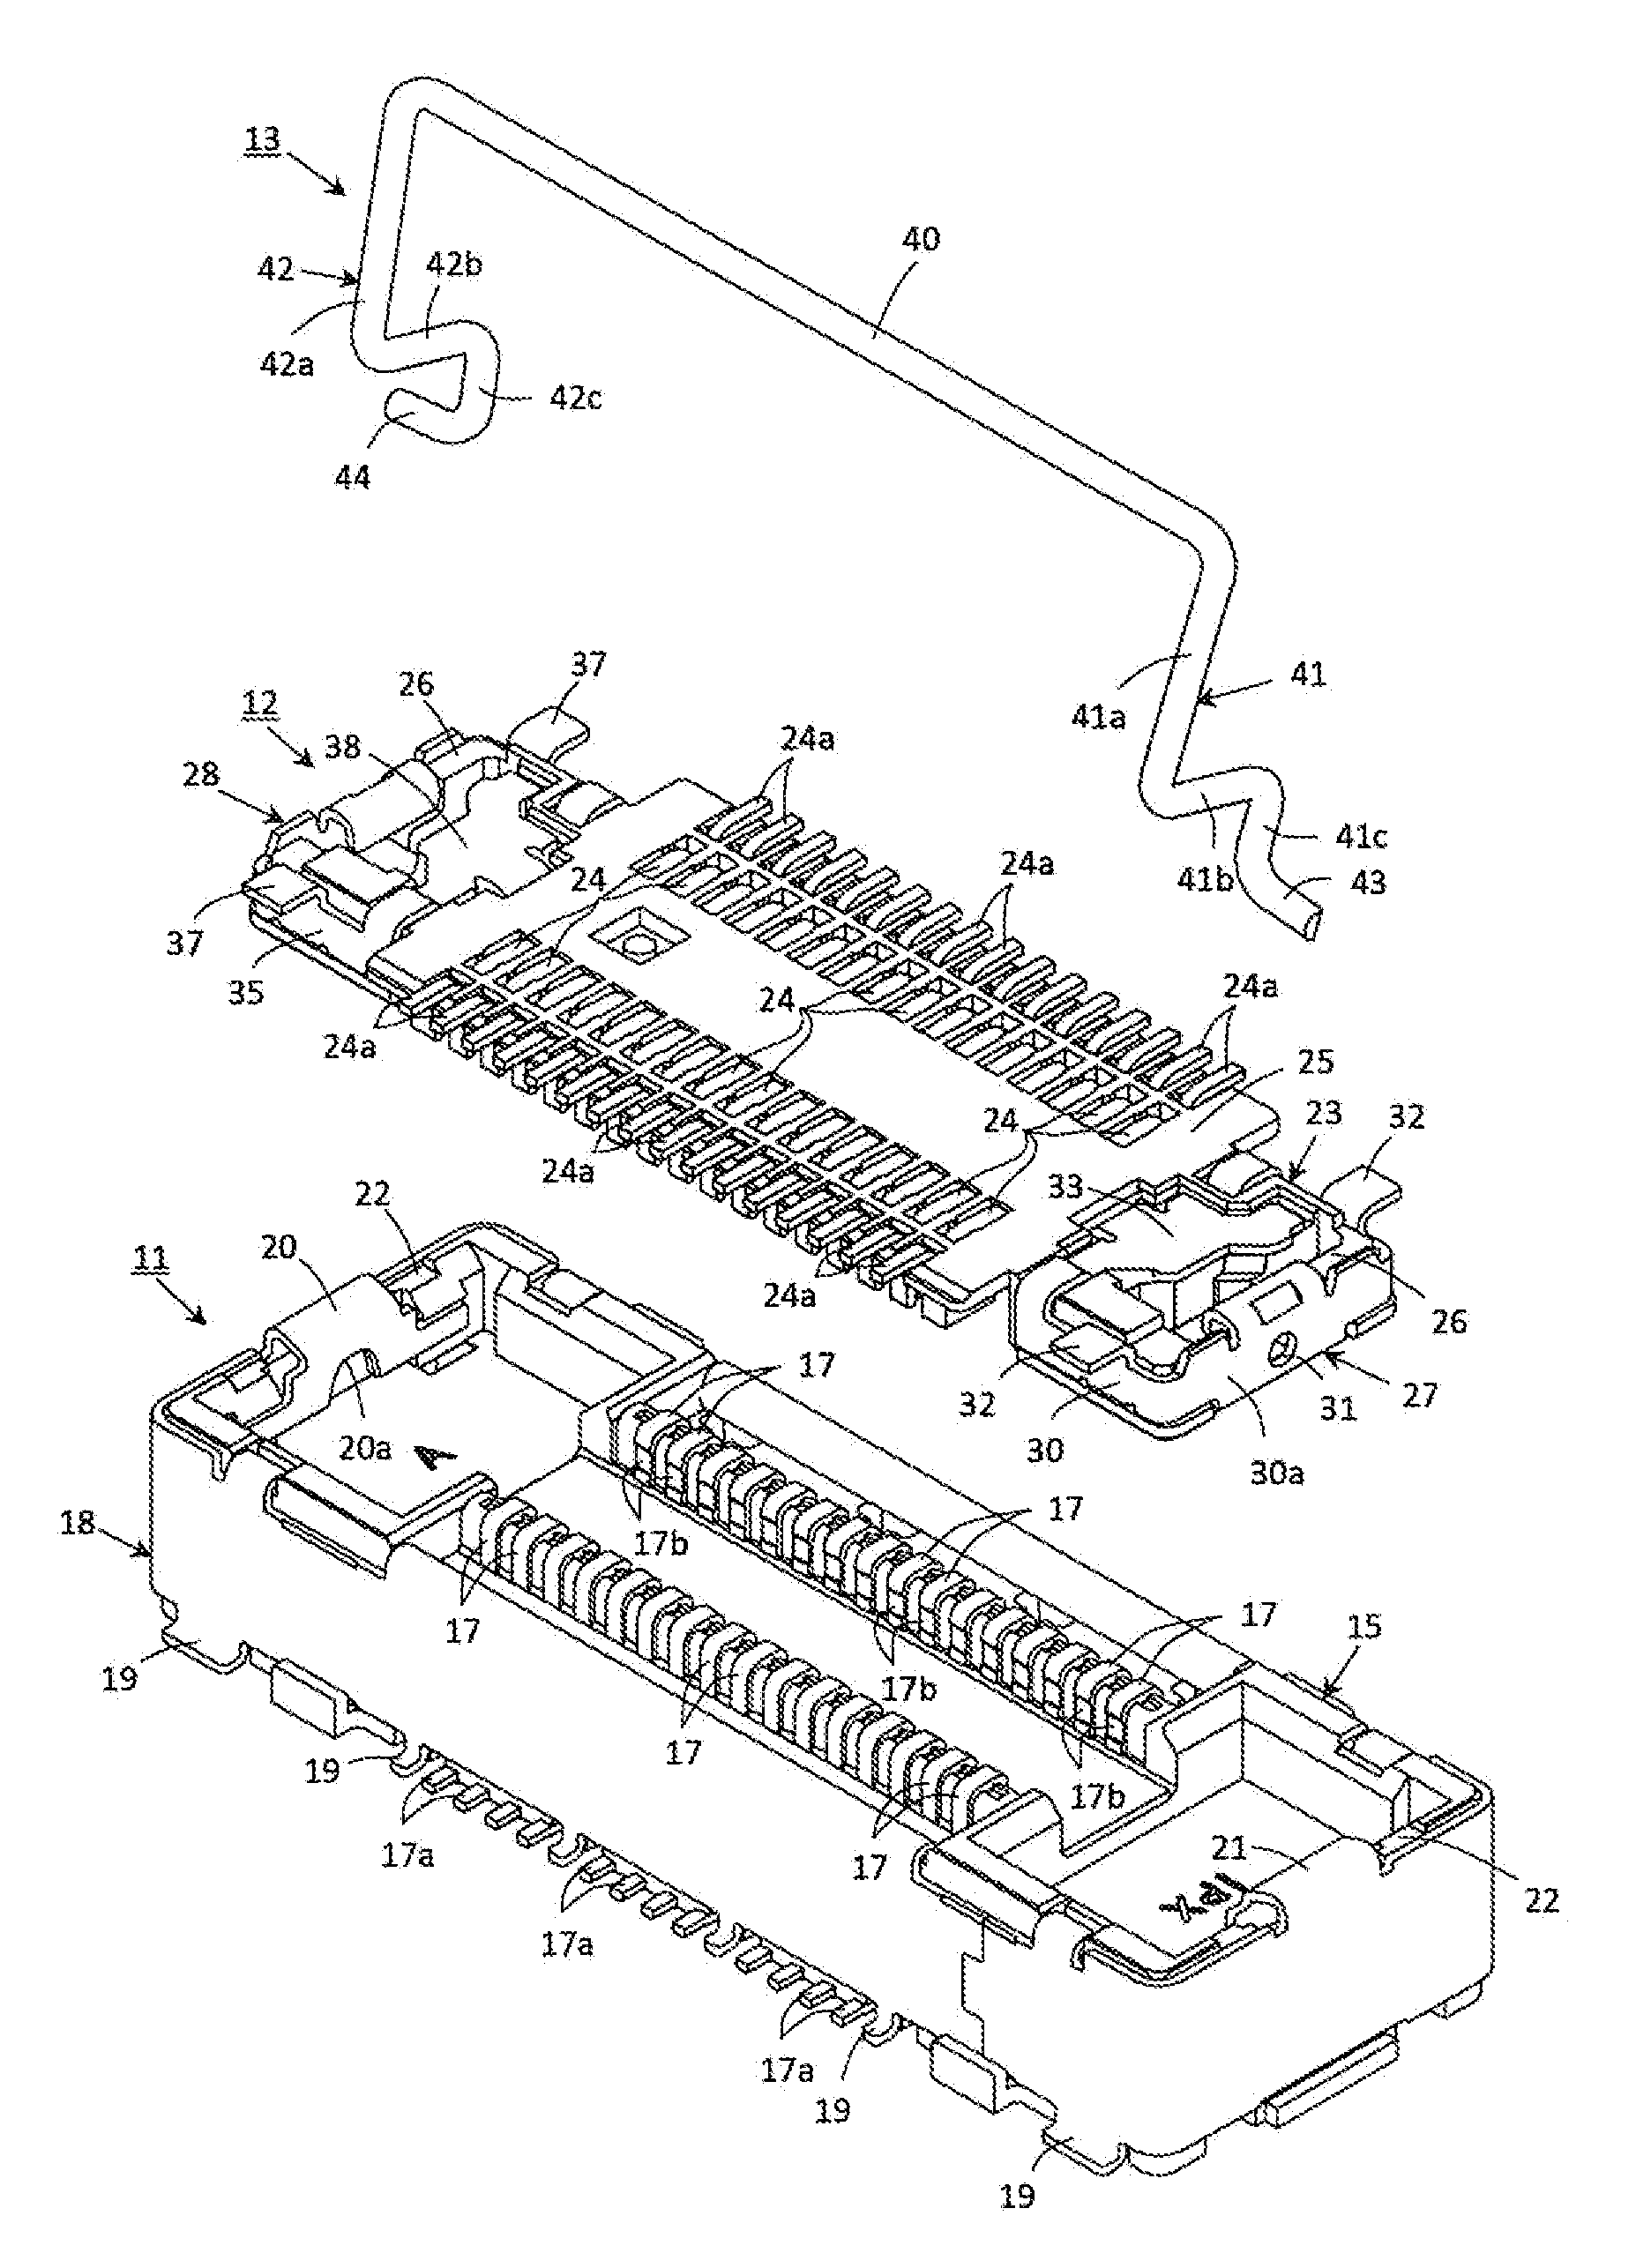 Circuit-terminal connecting device